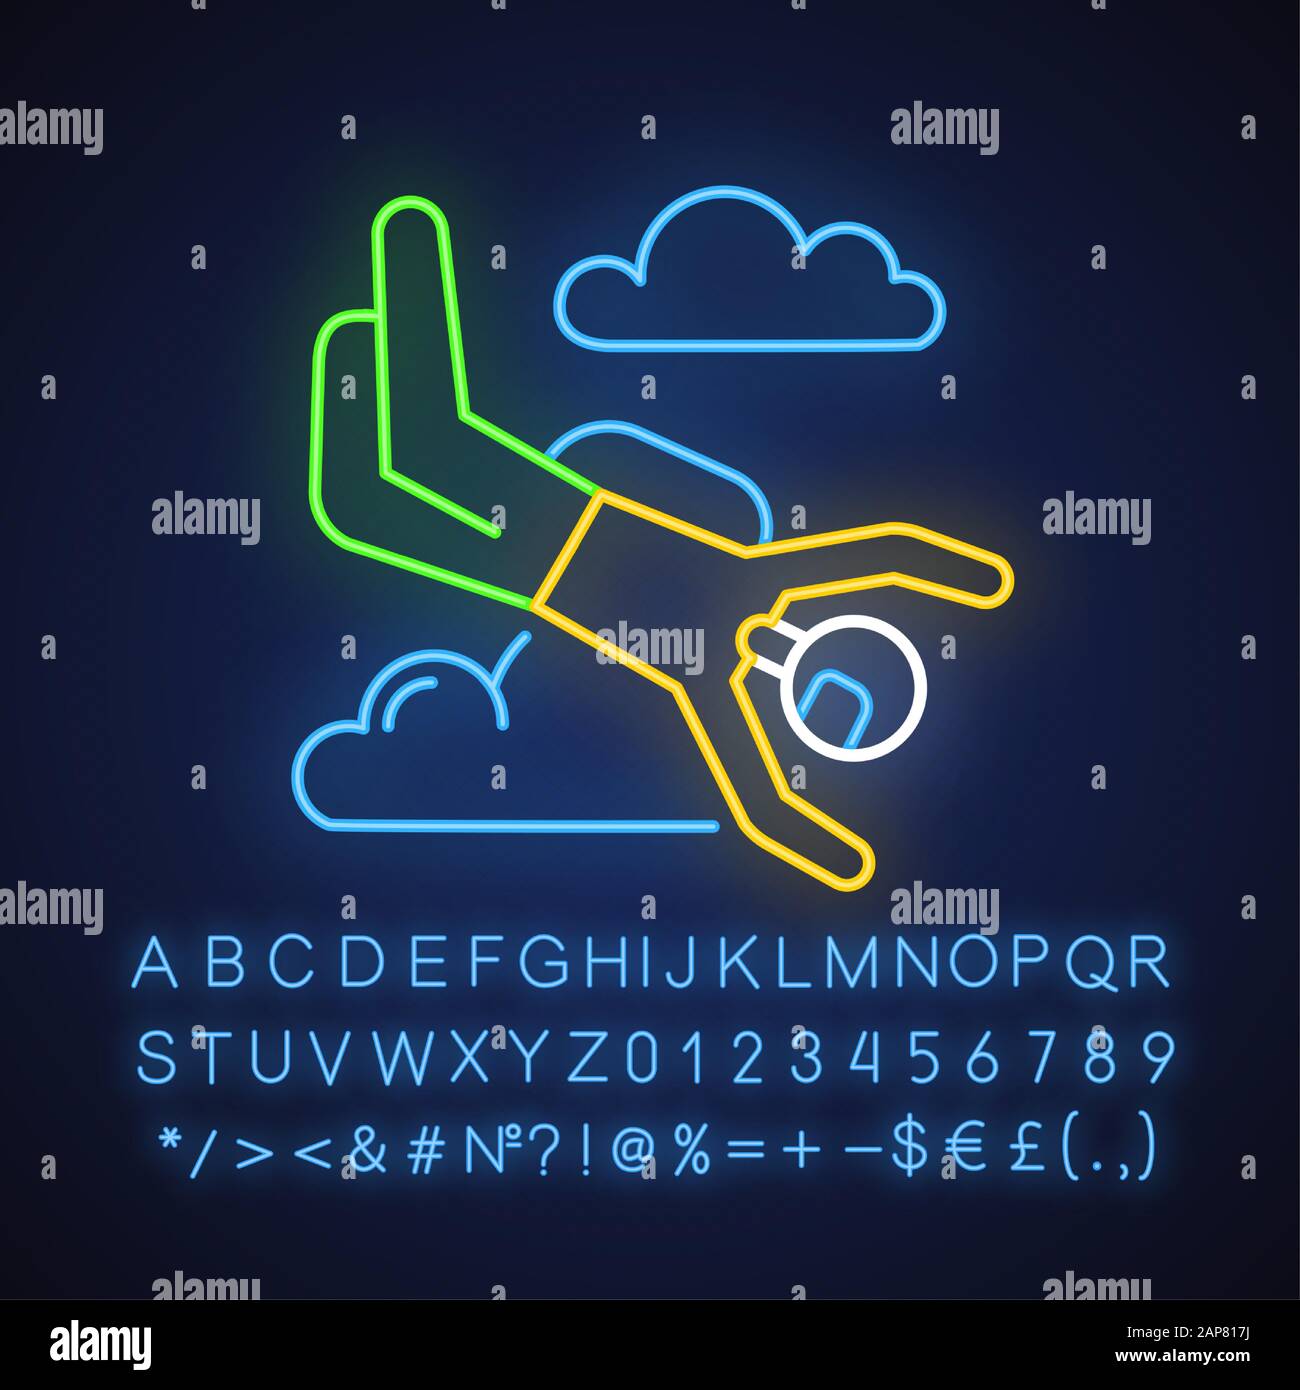 Skydiving neon light icon. Sky diving. Freefall tricks. Skydiver jumping with parachute. Parachutist flying in sky. Glowing sign with alphabet, number Stock Vector